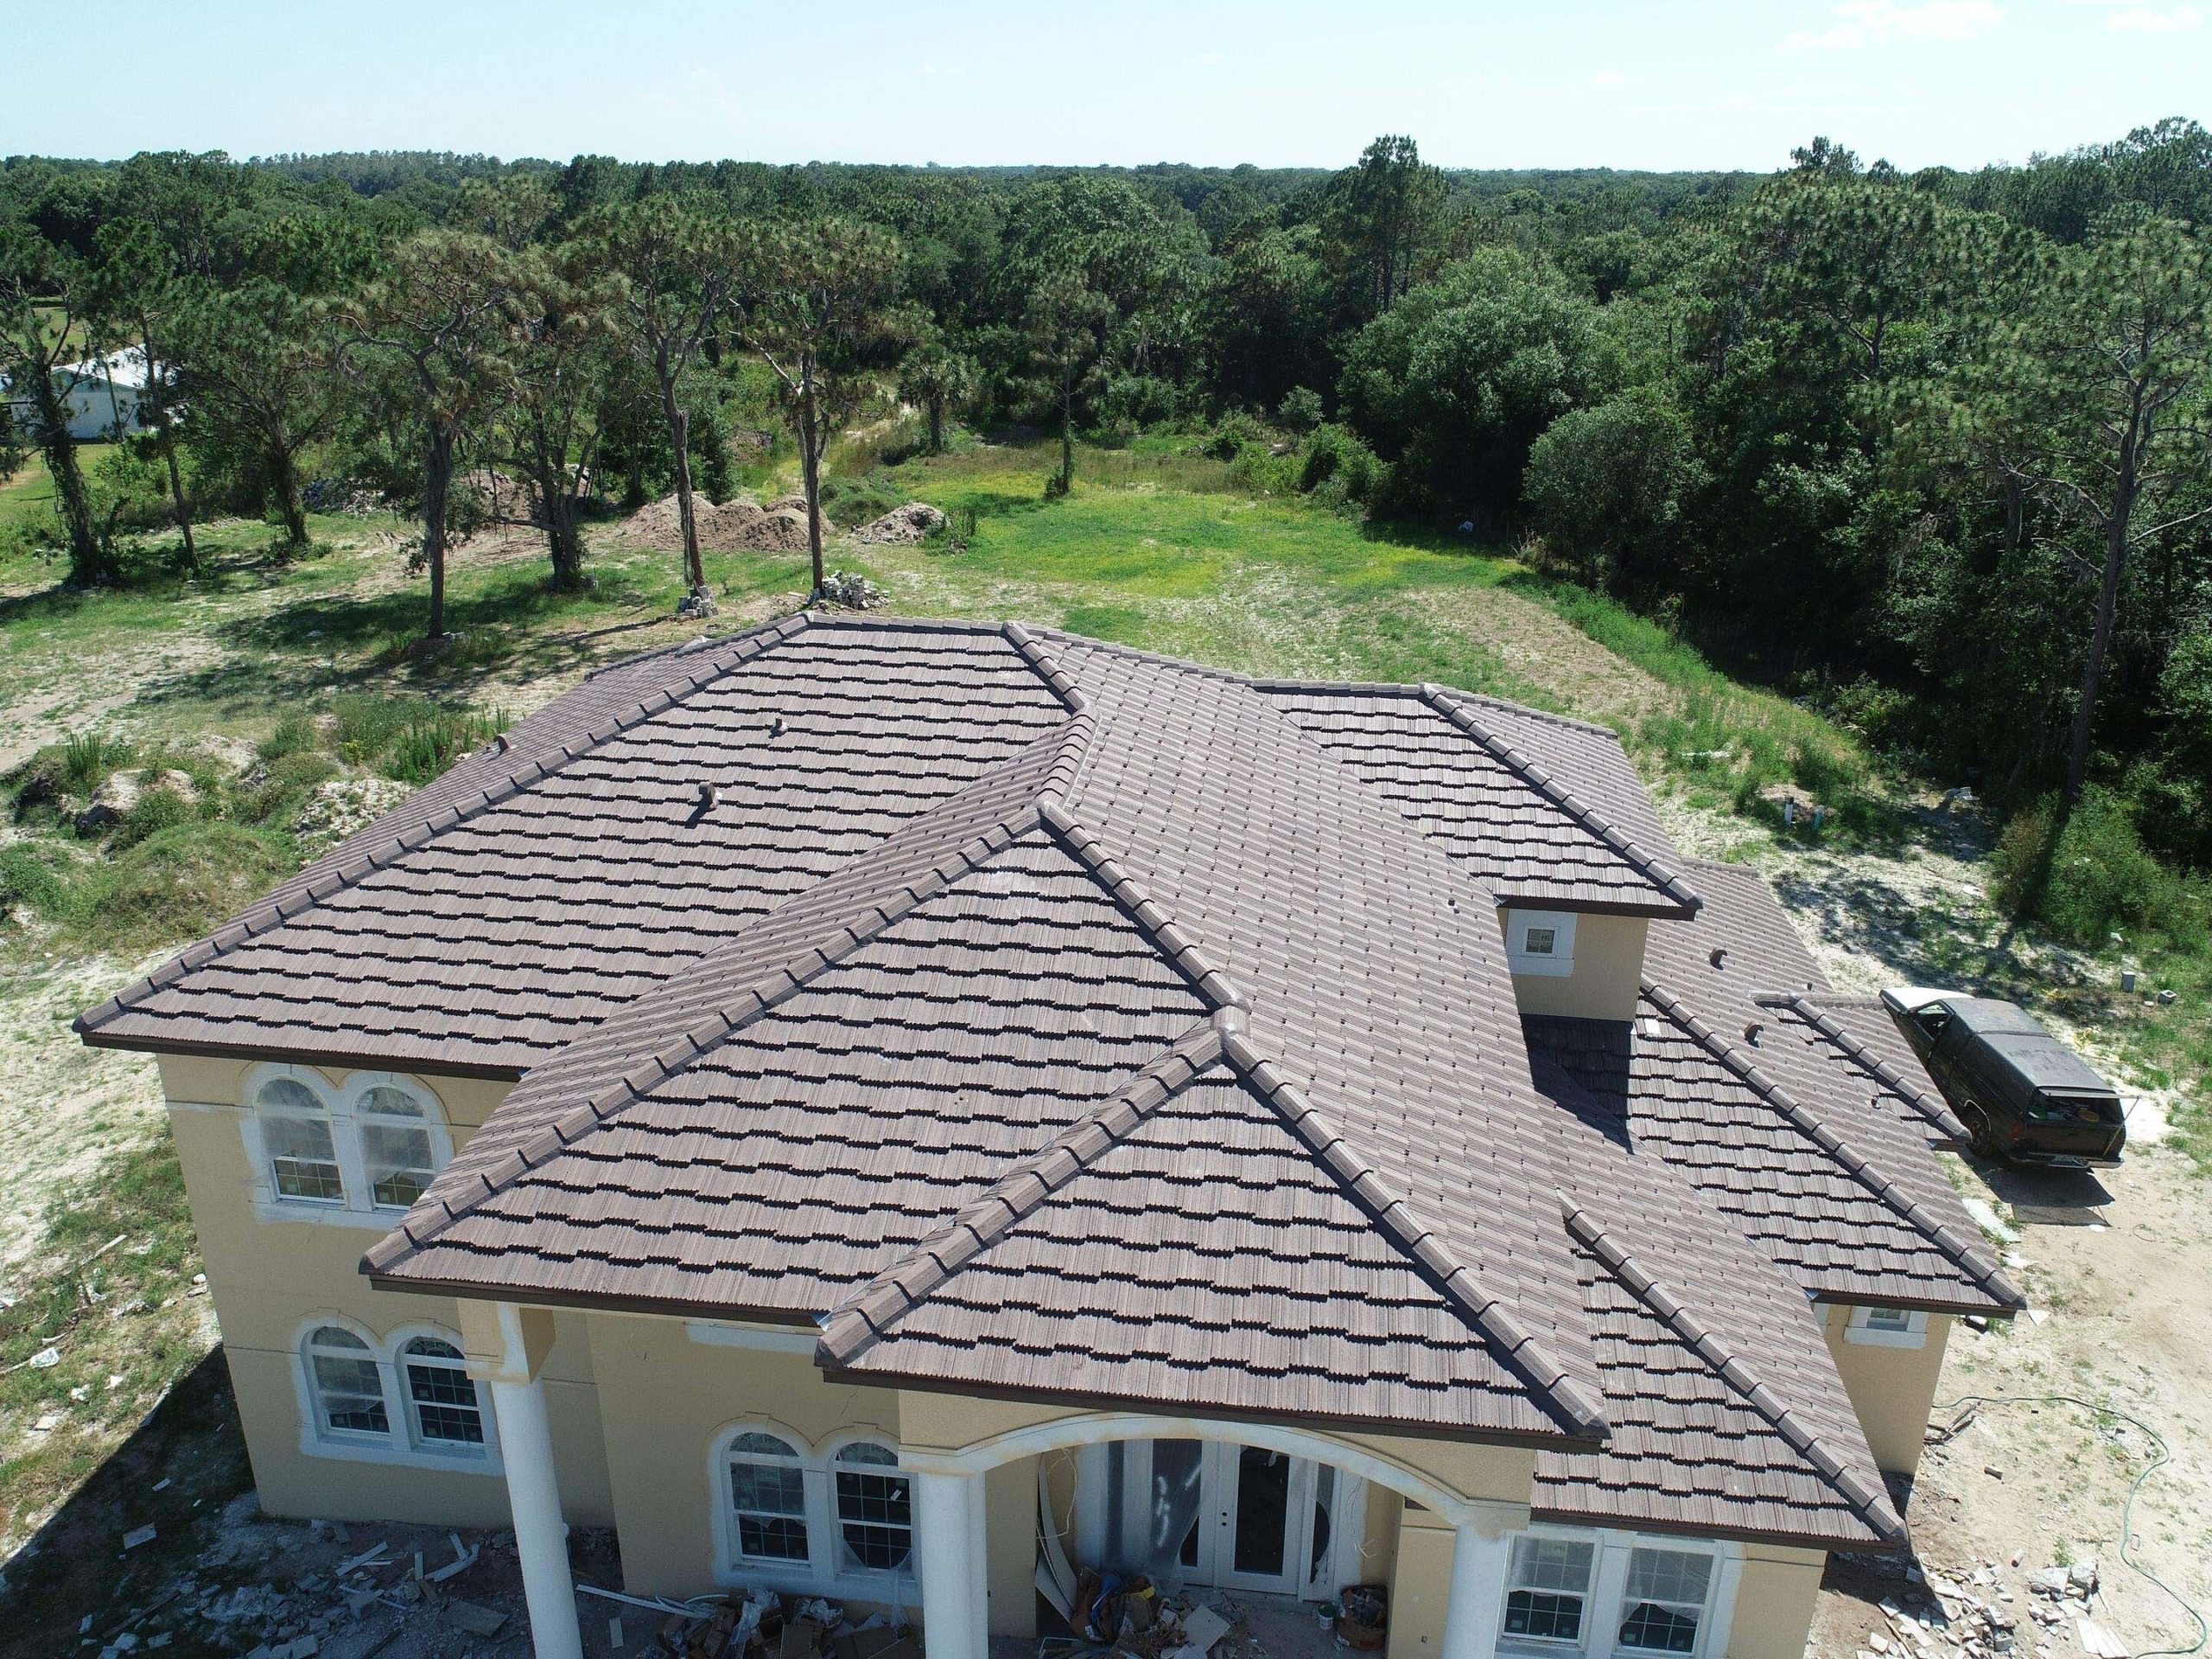 Overhead view of multi-level tile roofing